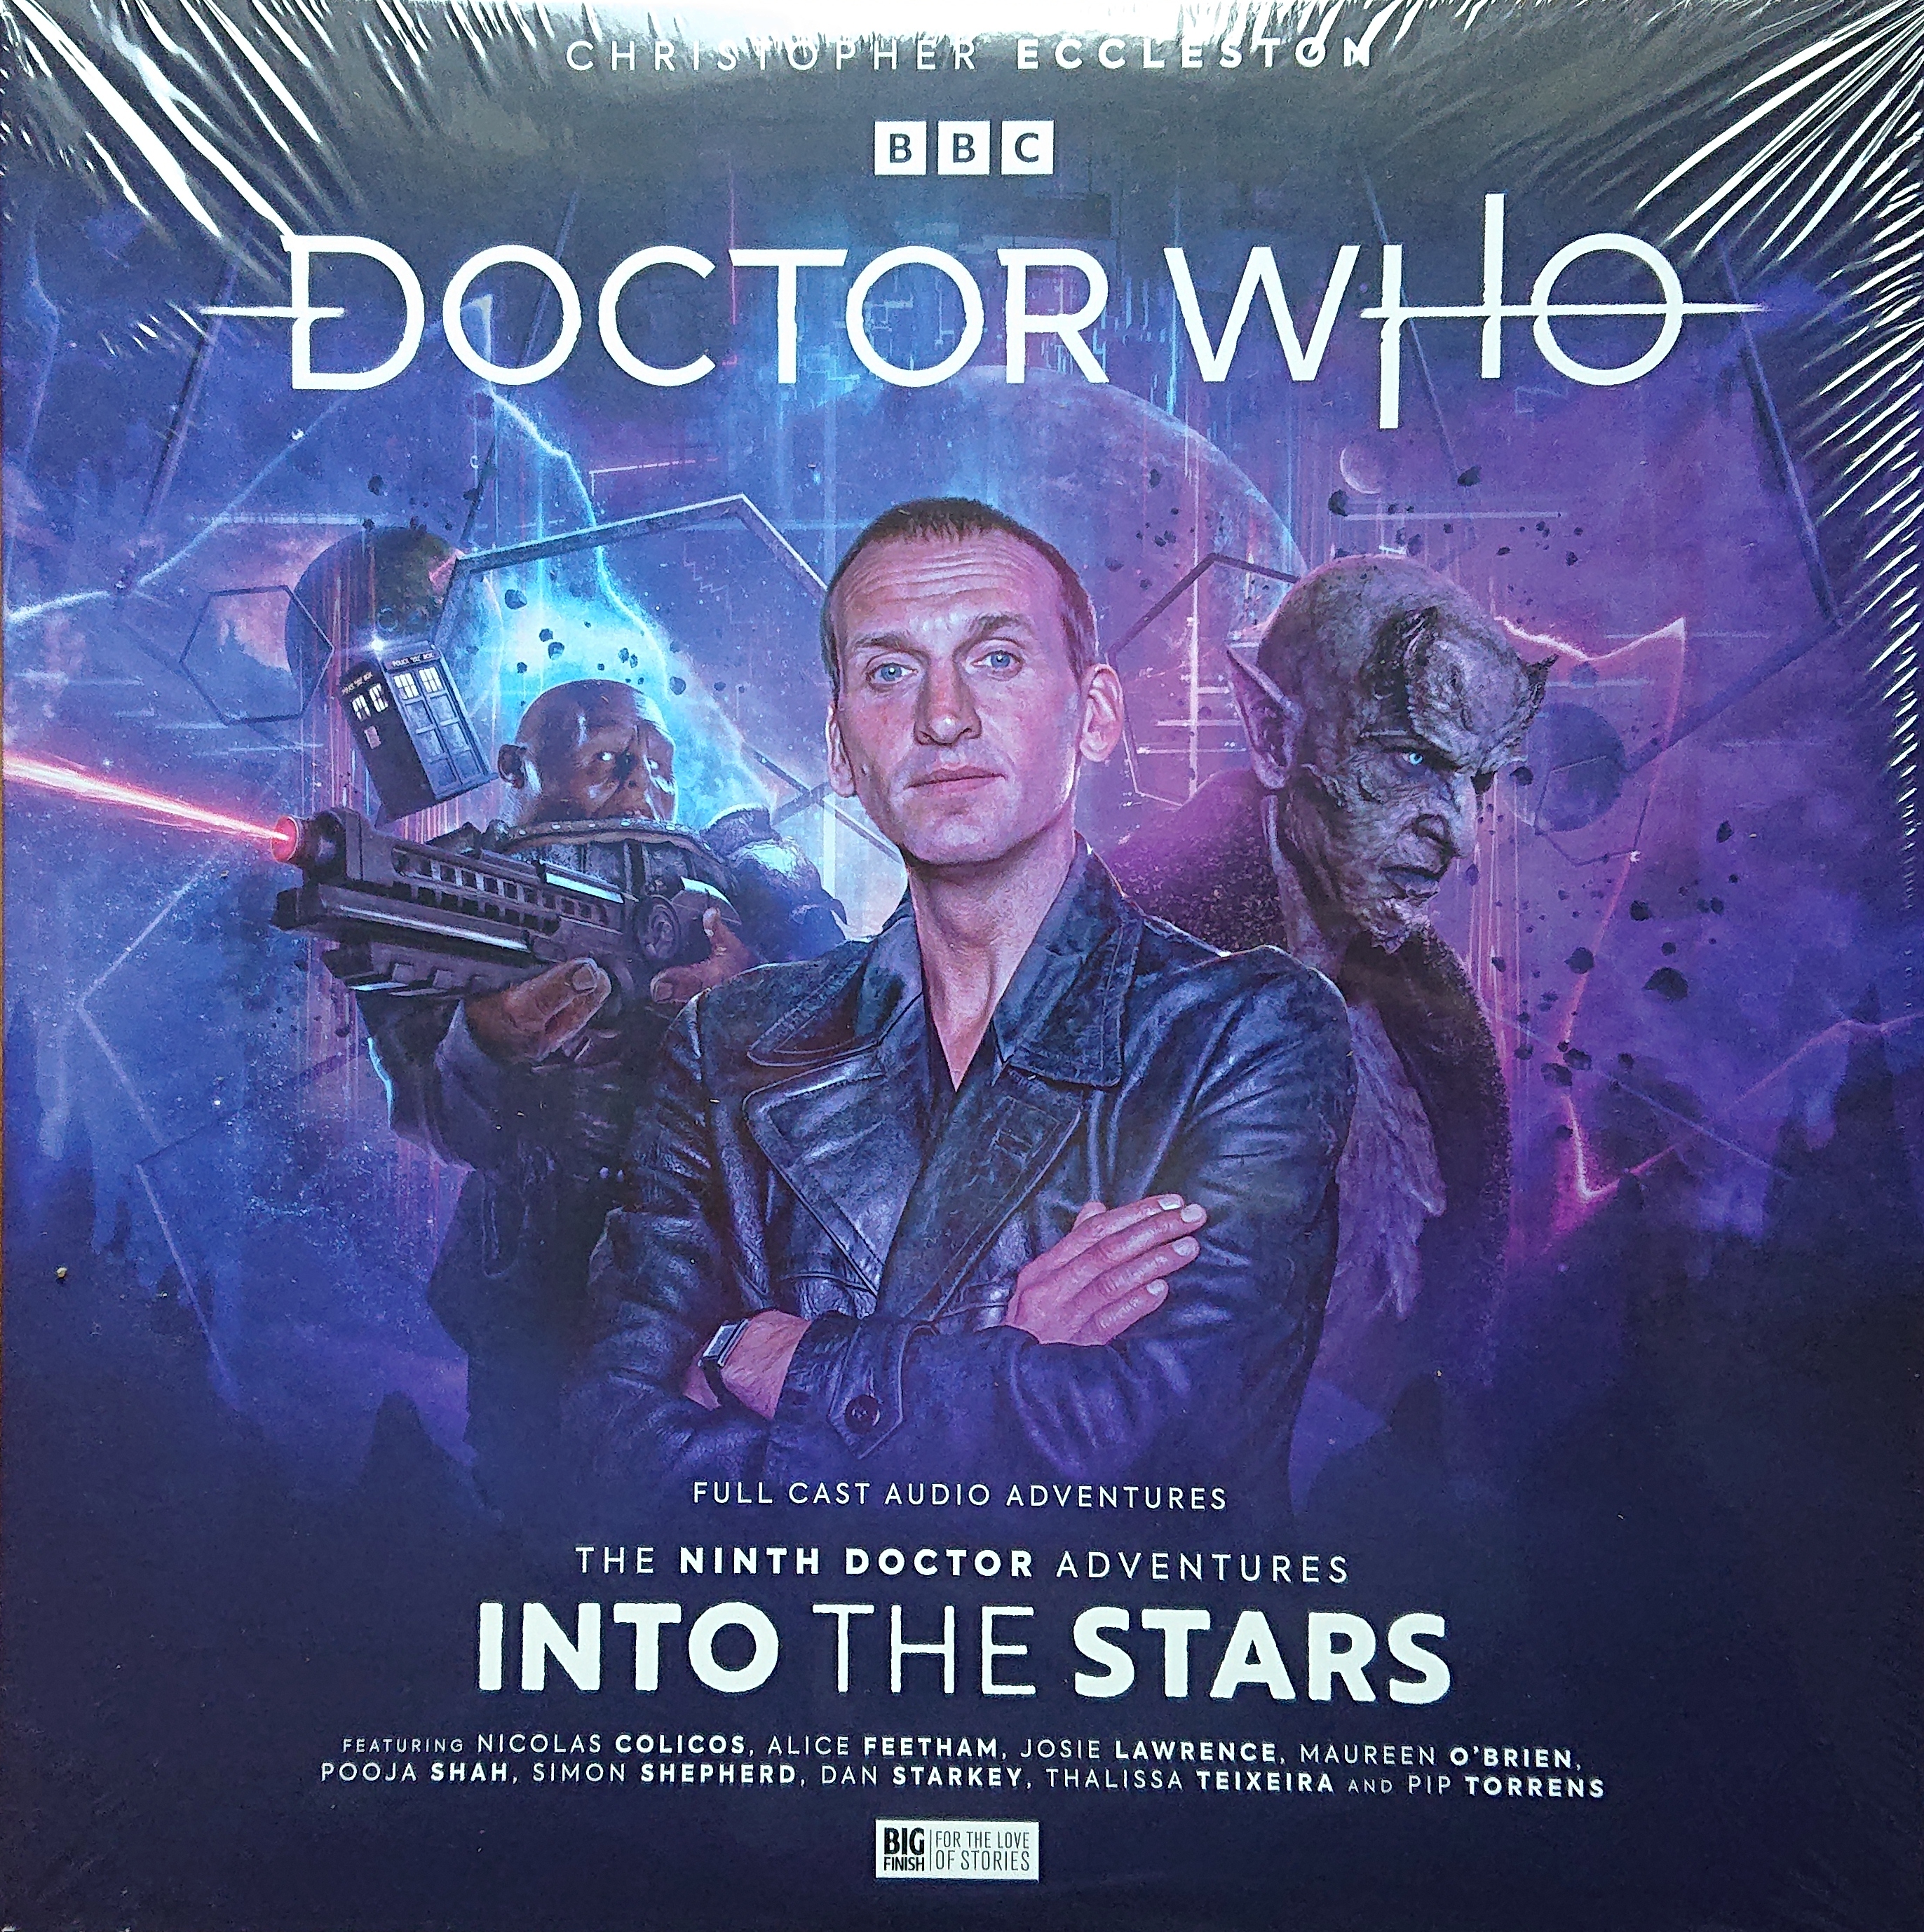 Picture of BFPDW9TH06V Doctor Who - The Ninth Doctor Adventures 2.2: Into the stars by artist Timothy X Atack / James Kettle / Tim Foley from the BBC records and Tapes library